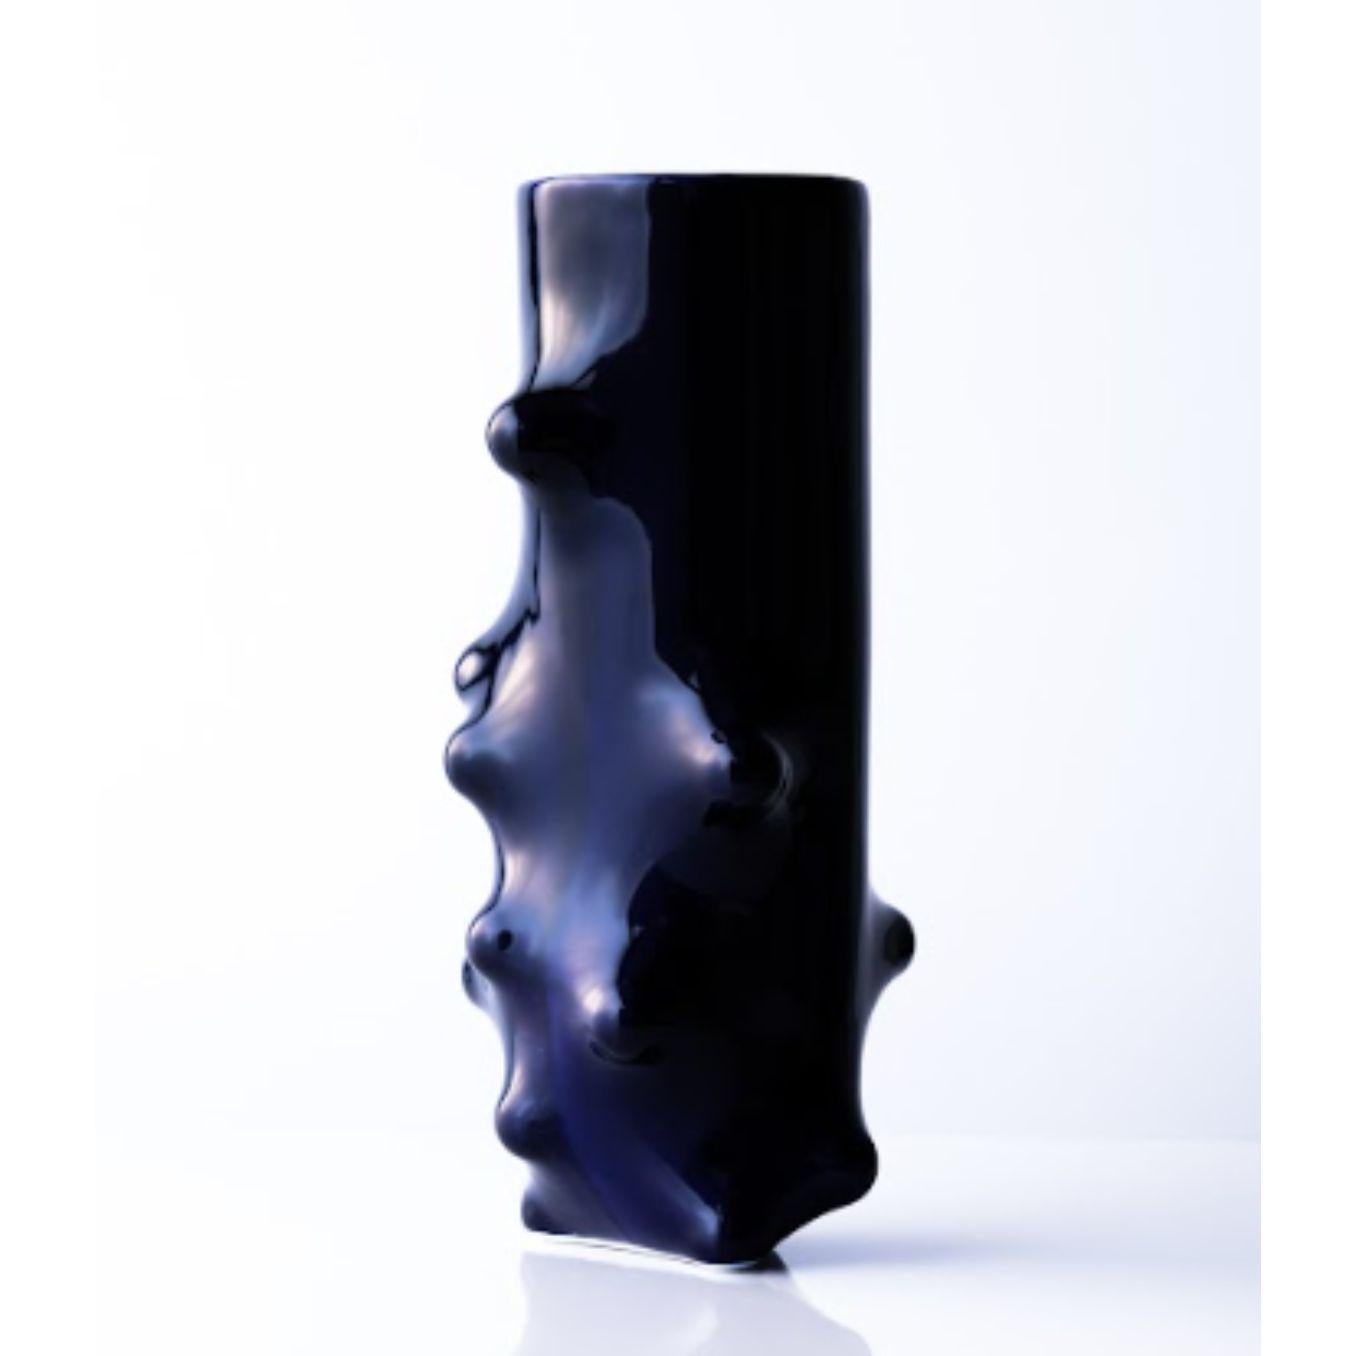 Arkadiusz Szwed bumps 2.0 vase Long by Nów
Designed by Arkadiusz Szwed
Dimensions: D 30 x W 14 x H 14 cm
Materials: glazed porcelain, cobalt

BUMPS 2.0 is a set of ceramic objects that were created as a result of an experiment with a new,